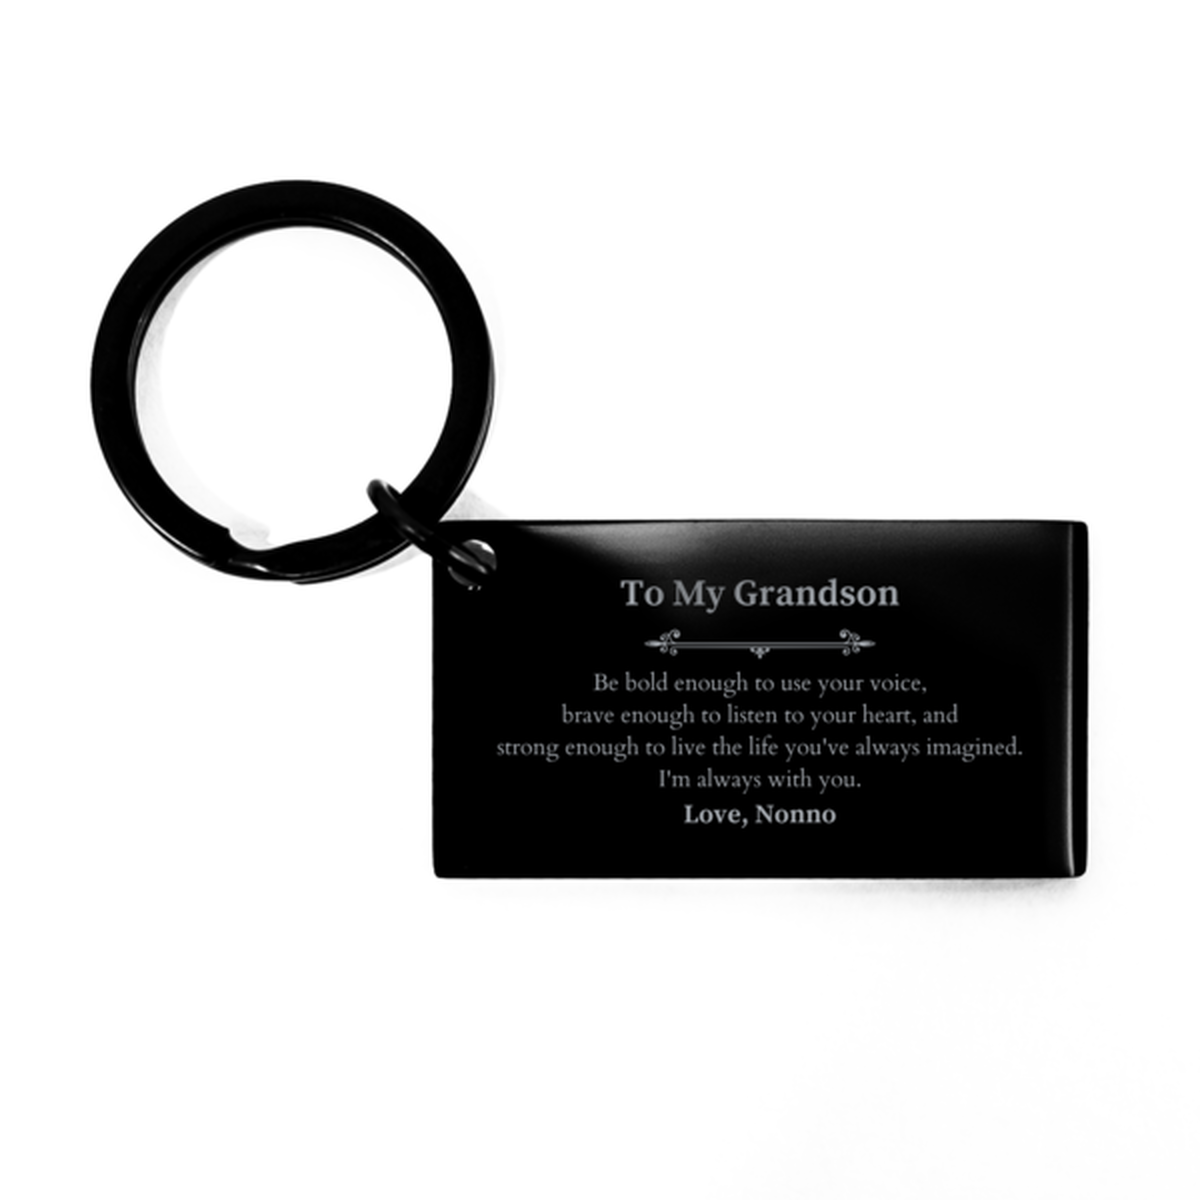 Keepsake Grandson Keychain Gift Idea Graduation Christmas Birthday Grandson from Nonno, Grandson Be bold enough to use your voice, brave enough to listen to your heart. Love, Nonno